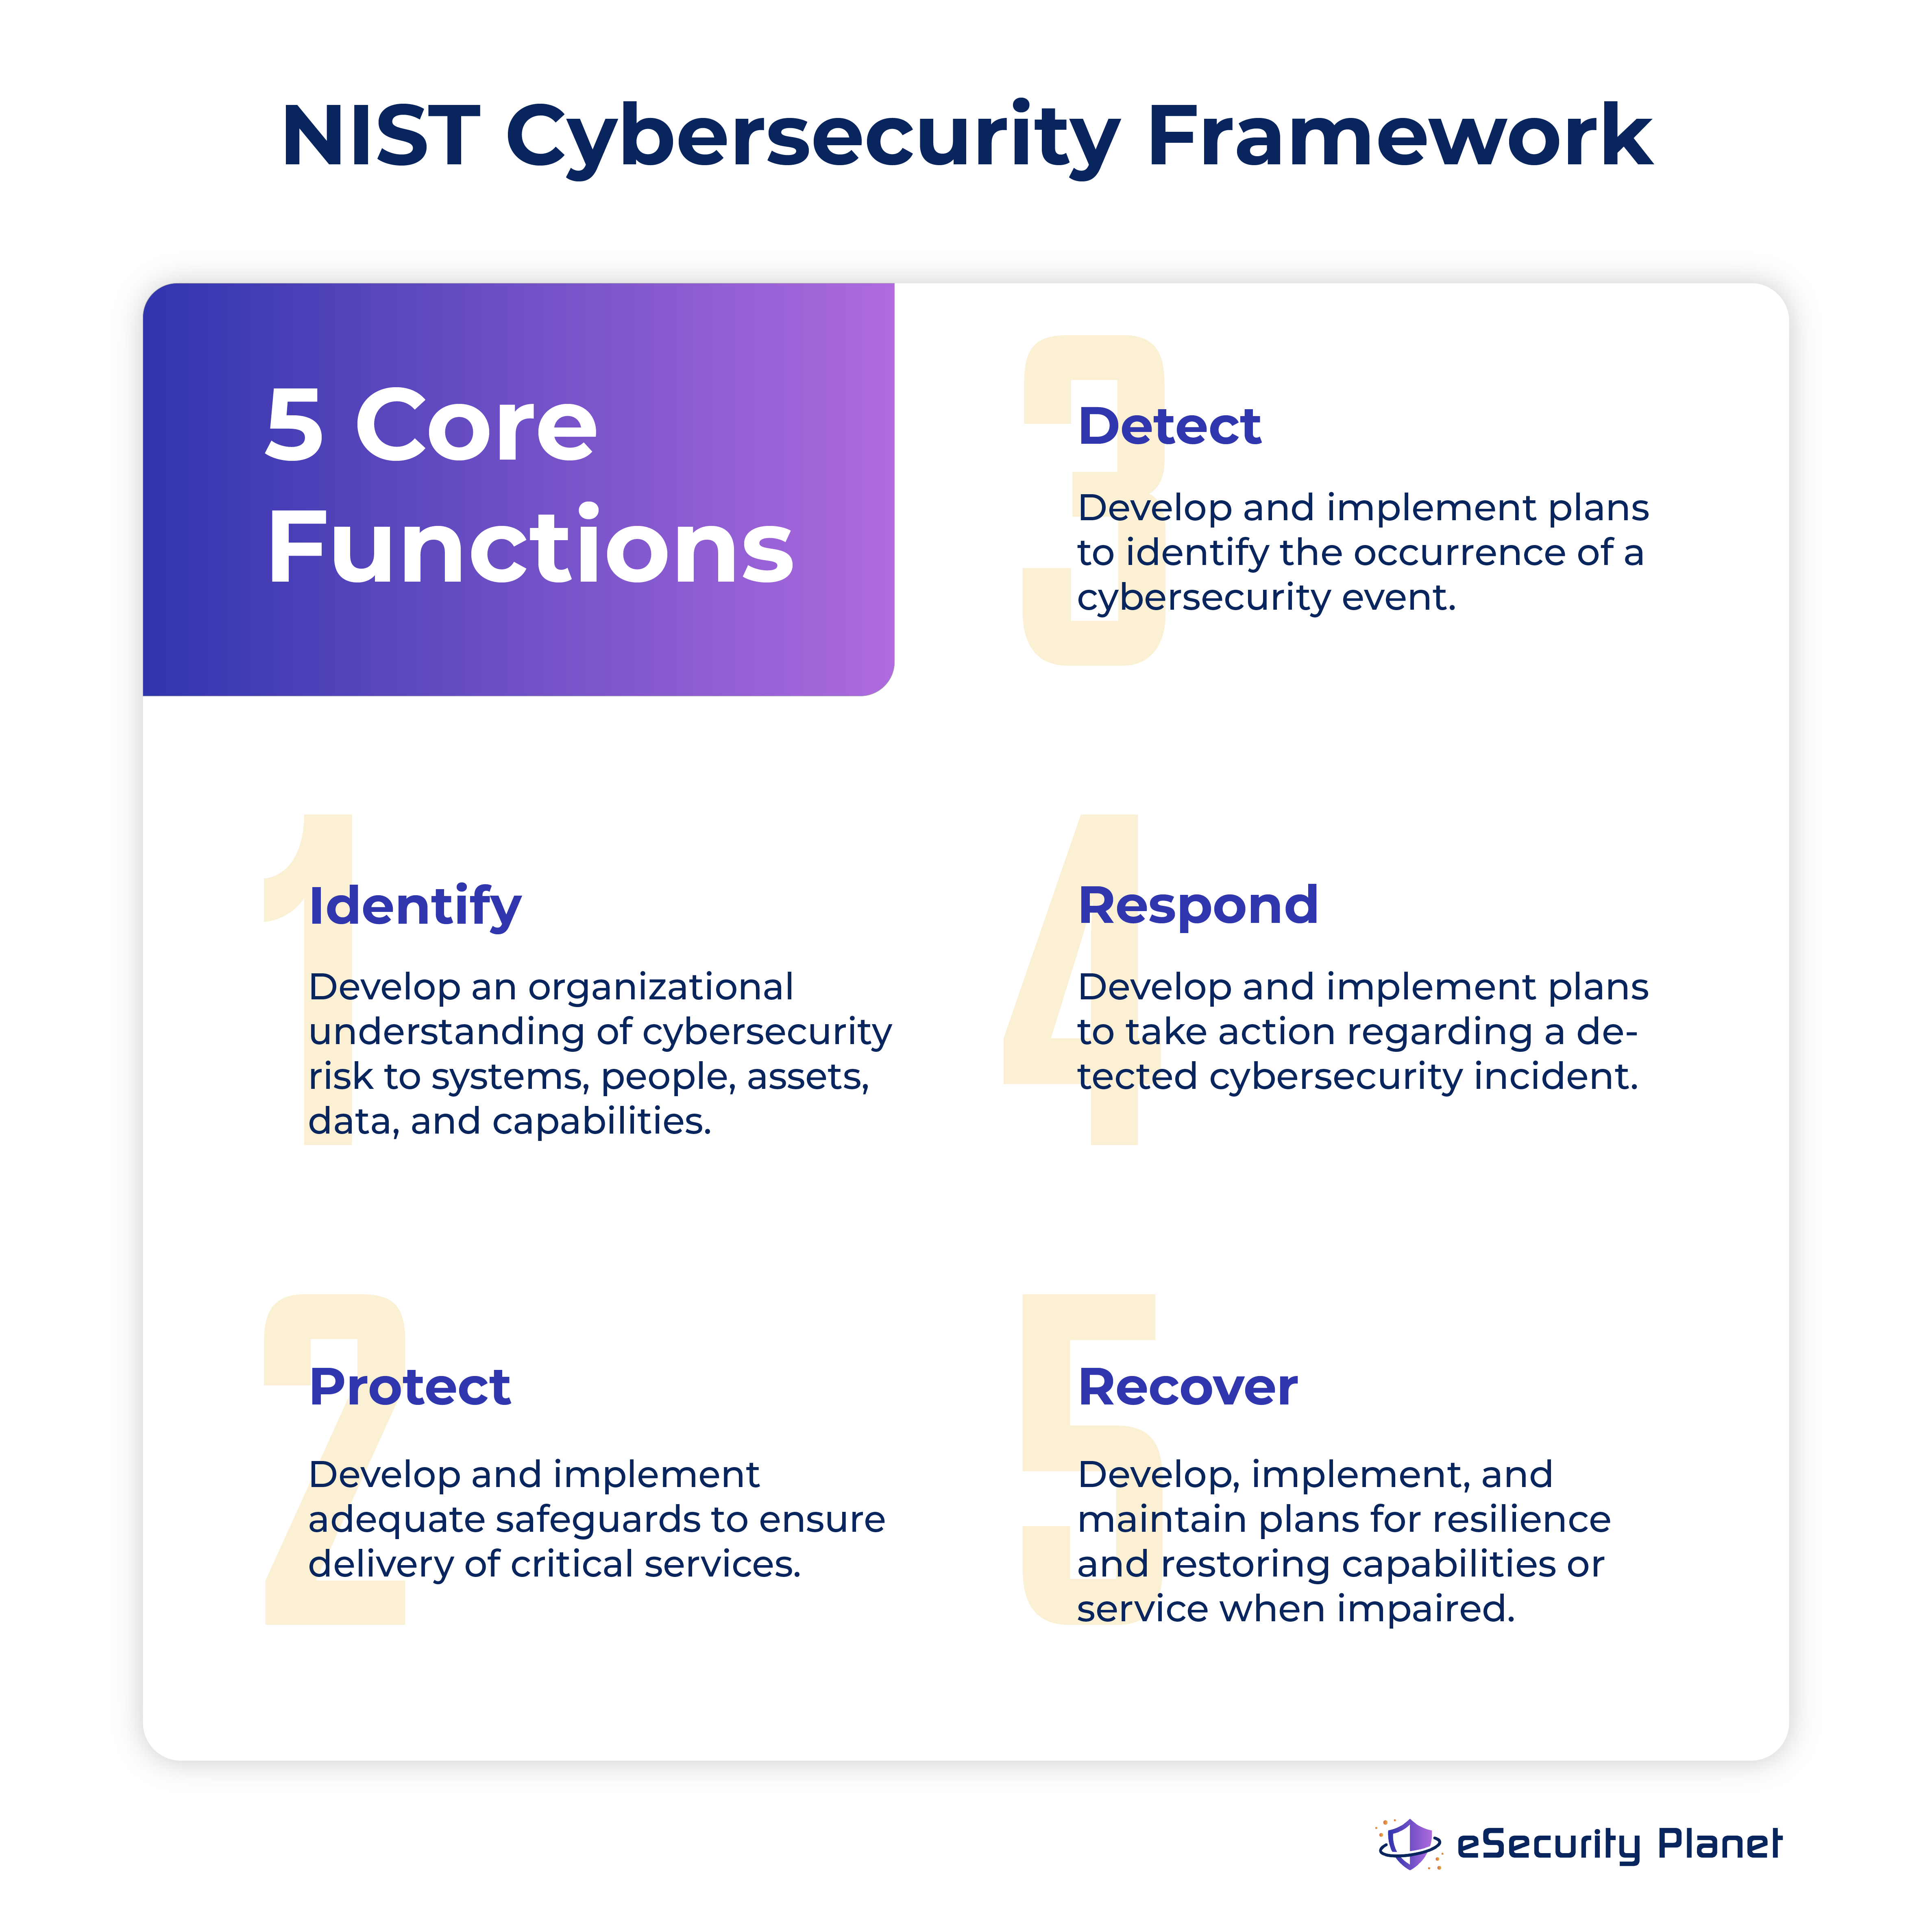 A graphic image showing the 5 core functions provided by the NIST Cybersecurity Framework are 1. Identify, 2. Protect, 3. Detect, 4. Respond, and 5. Recover.